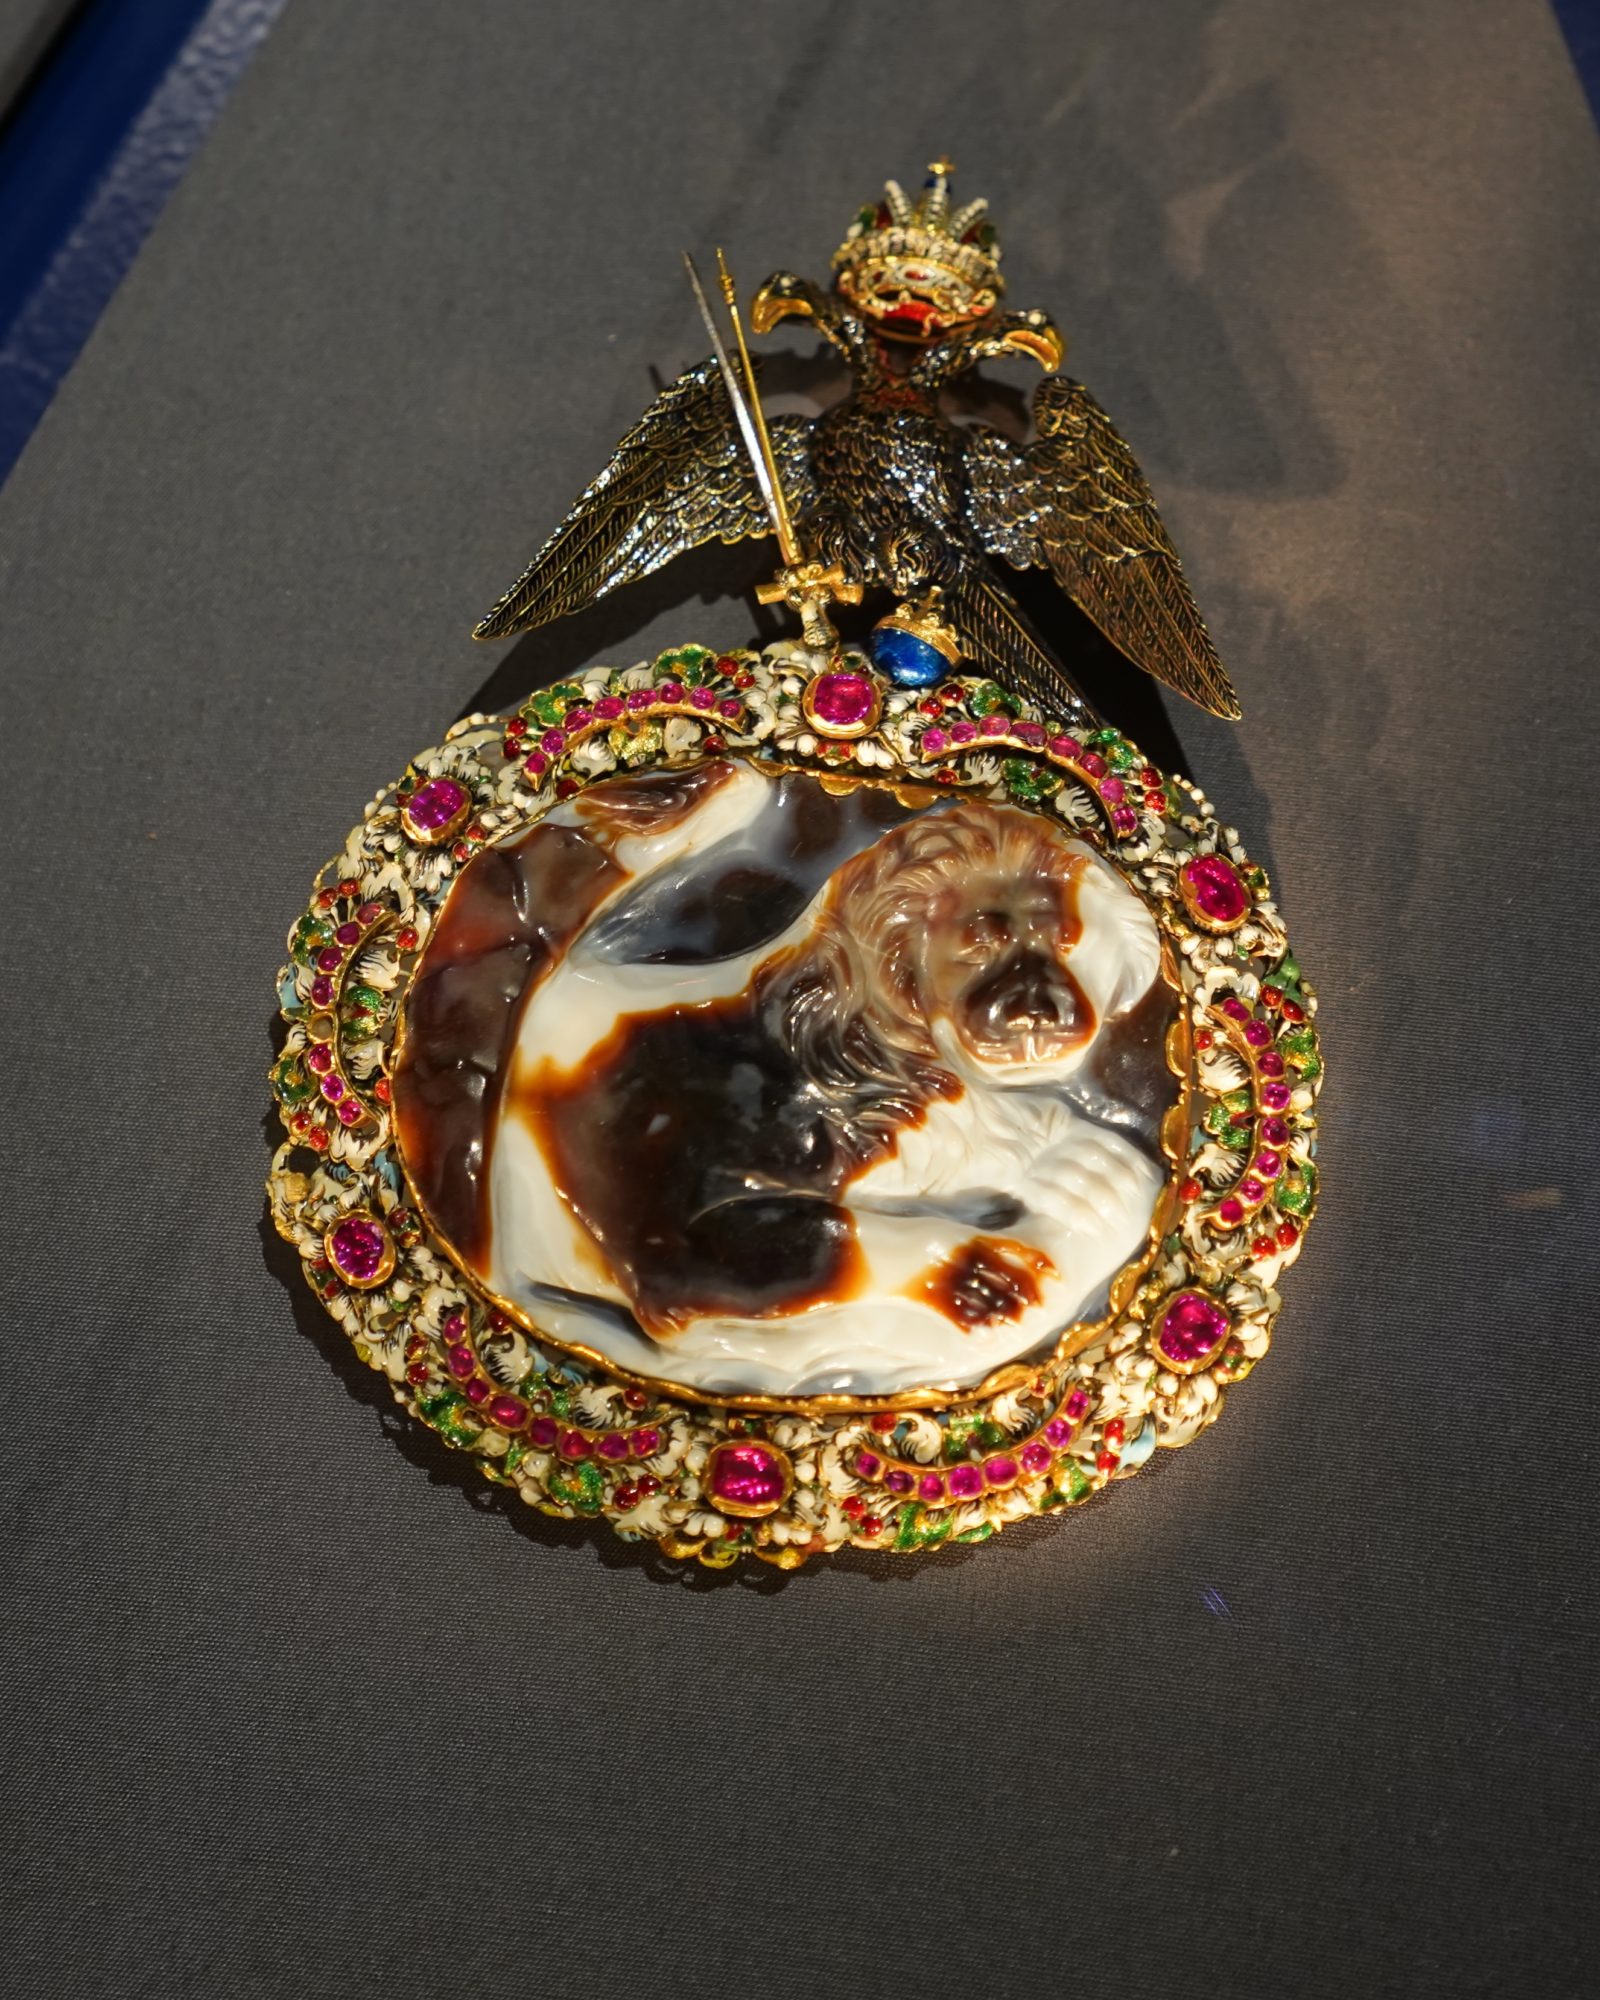 A cameo carved like a lion, in black, red and white, surrounded by a ring of gold and gems, with an imperial eagle on one side